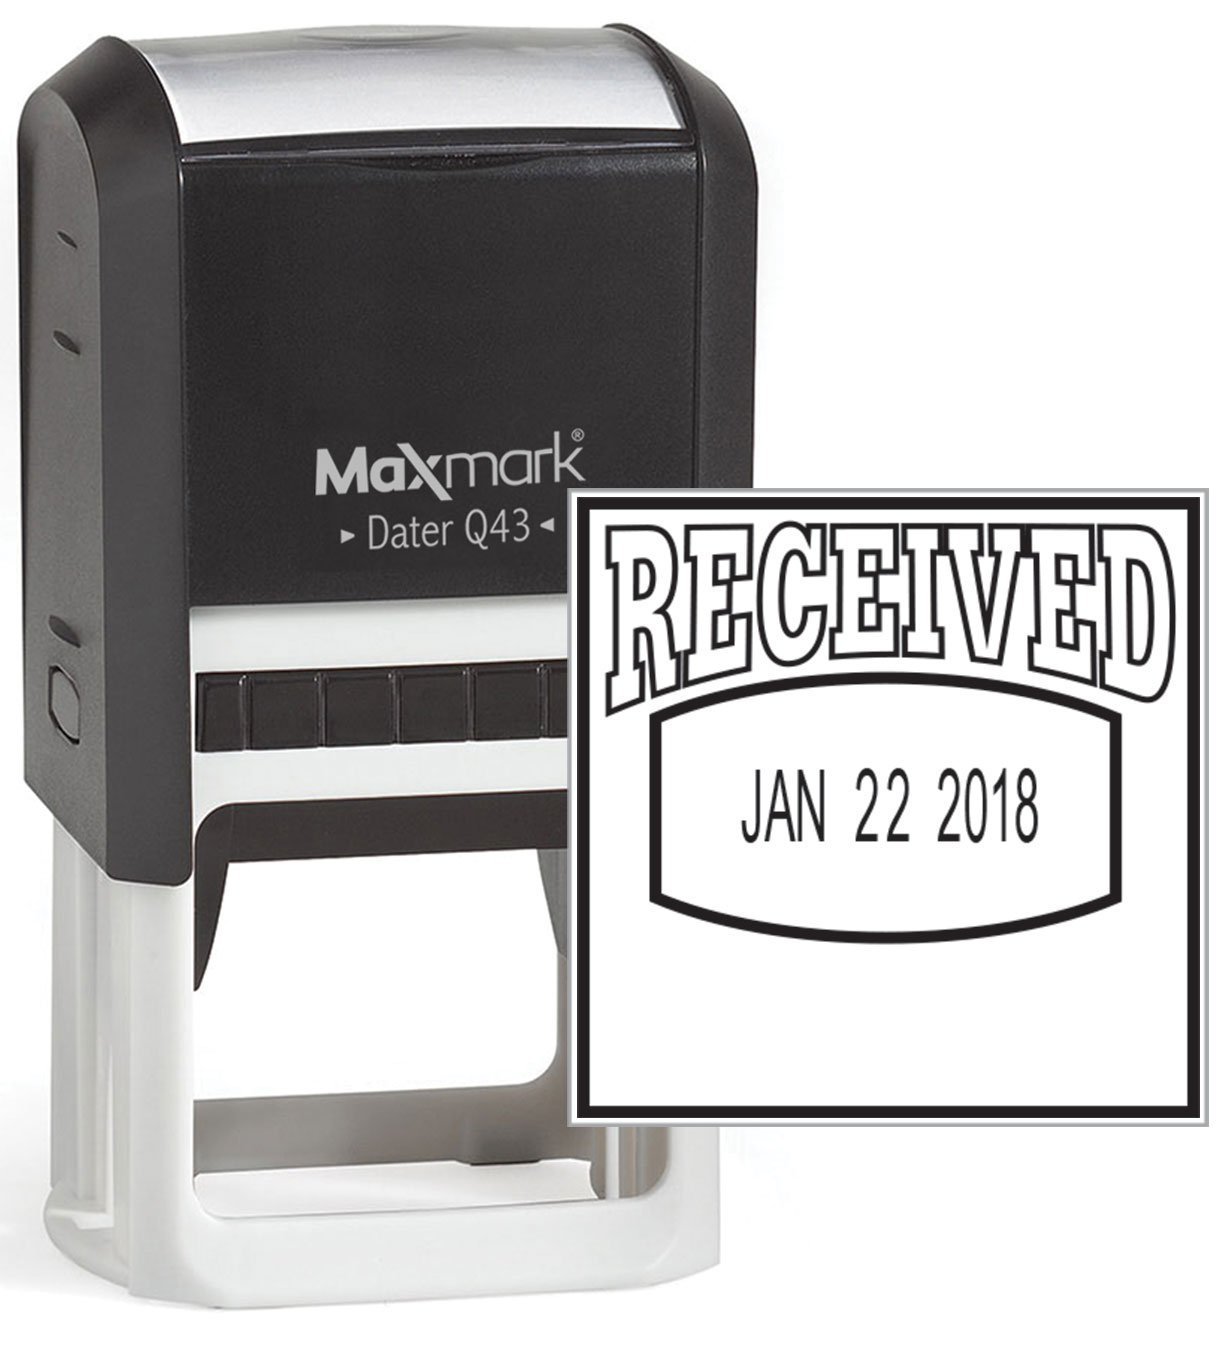 MaxMark Q43 (Large Size) Date Stamp with "RECEIVED" Self Inking Stamp - Black Ink